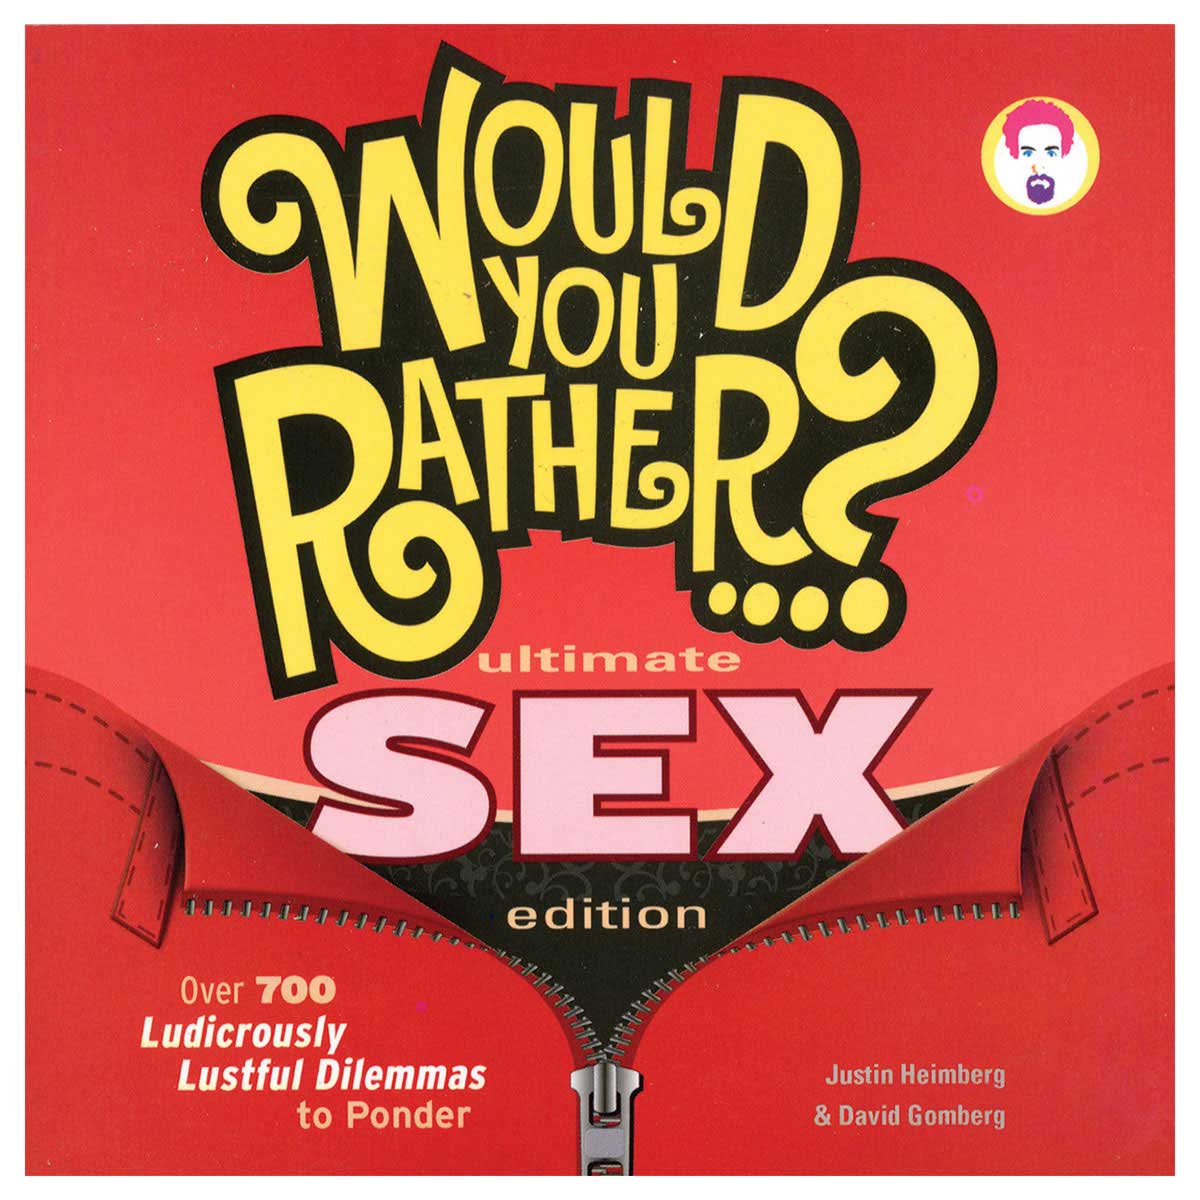 Would You Rather?: Ultimate Sex Edition - Seven Footer Press